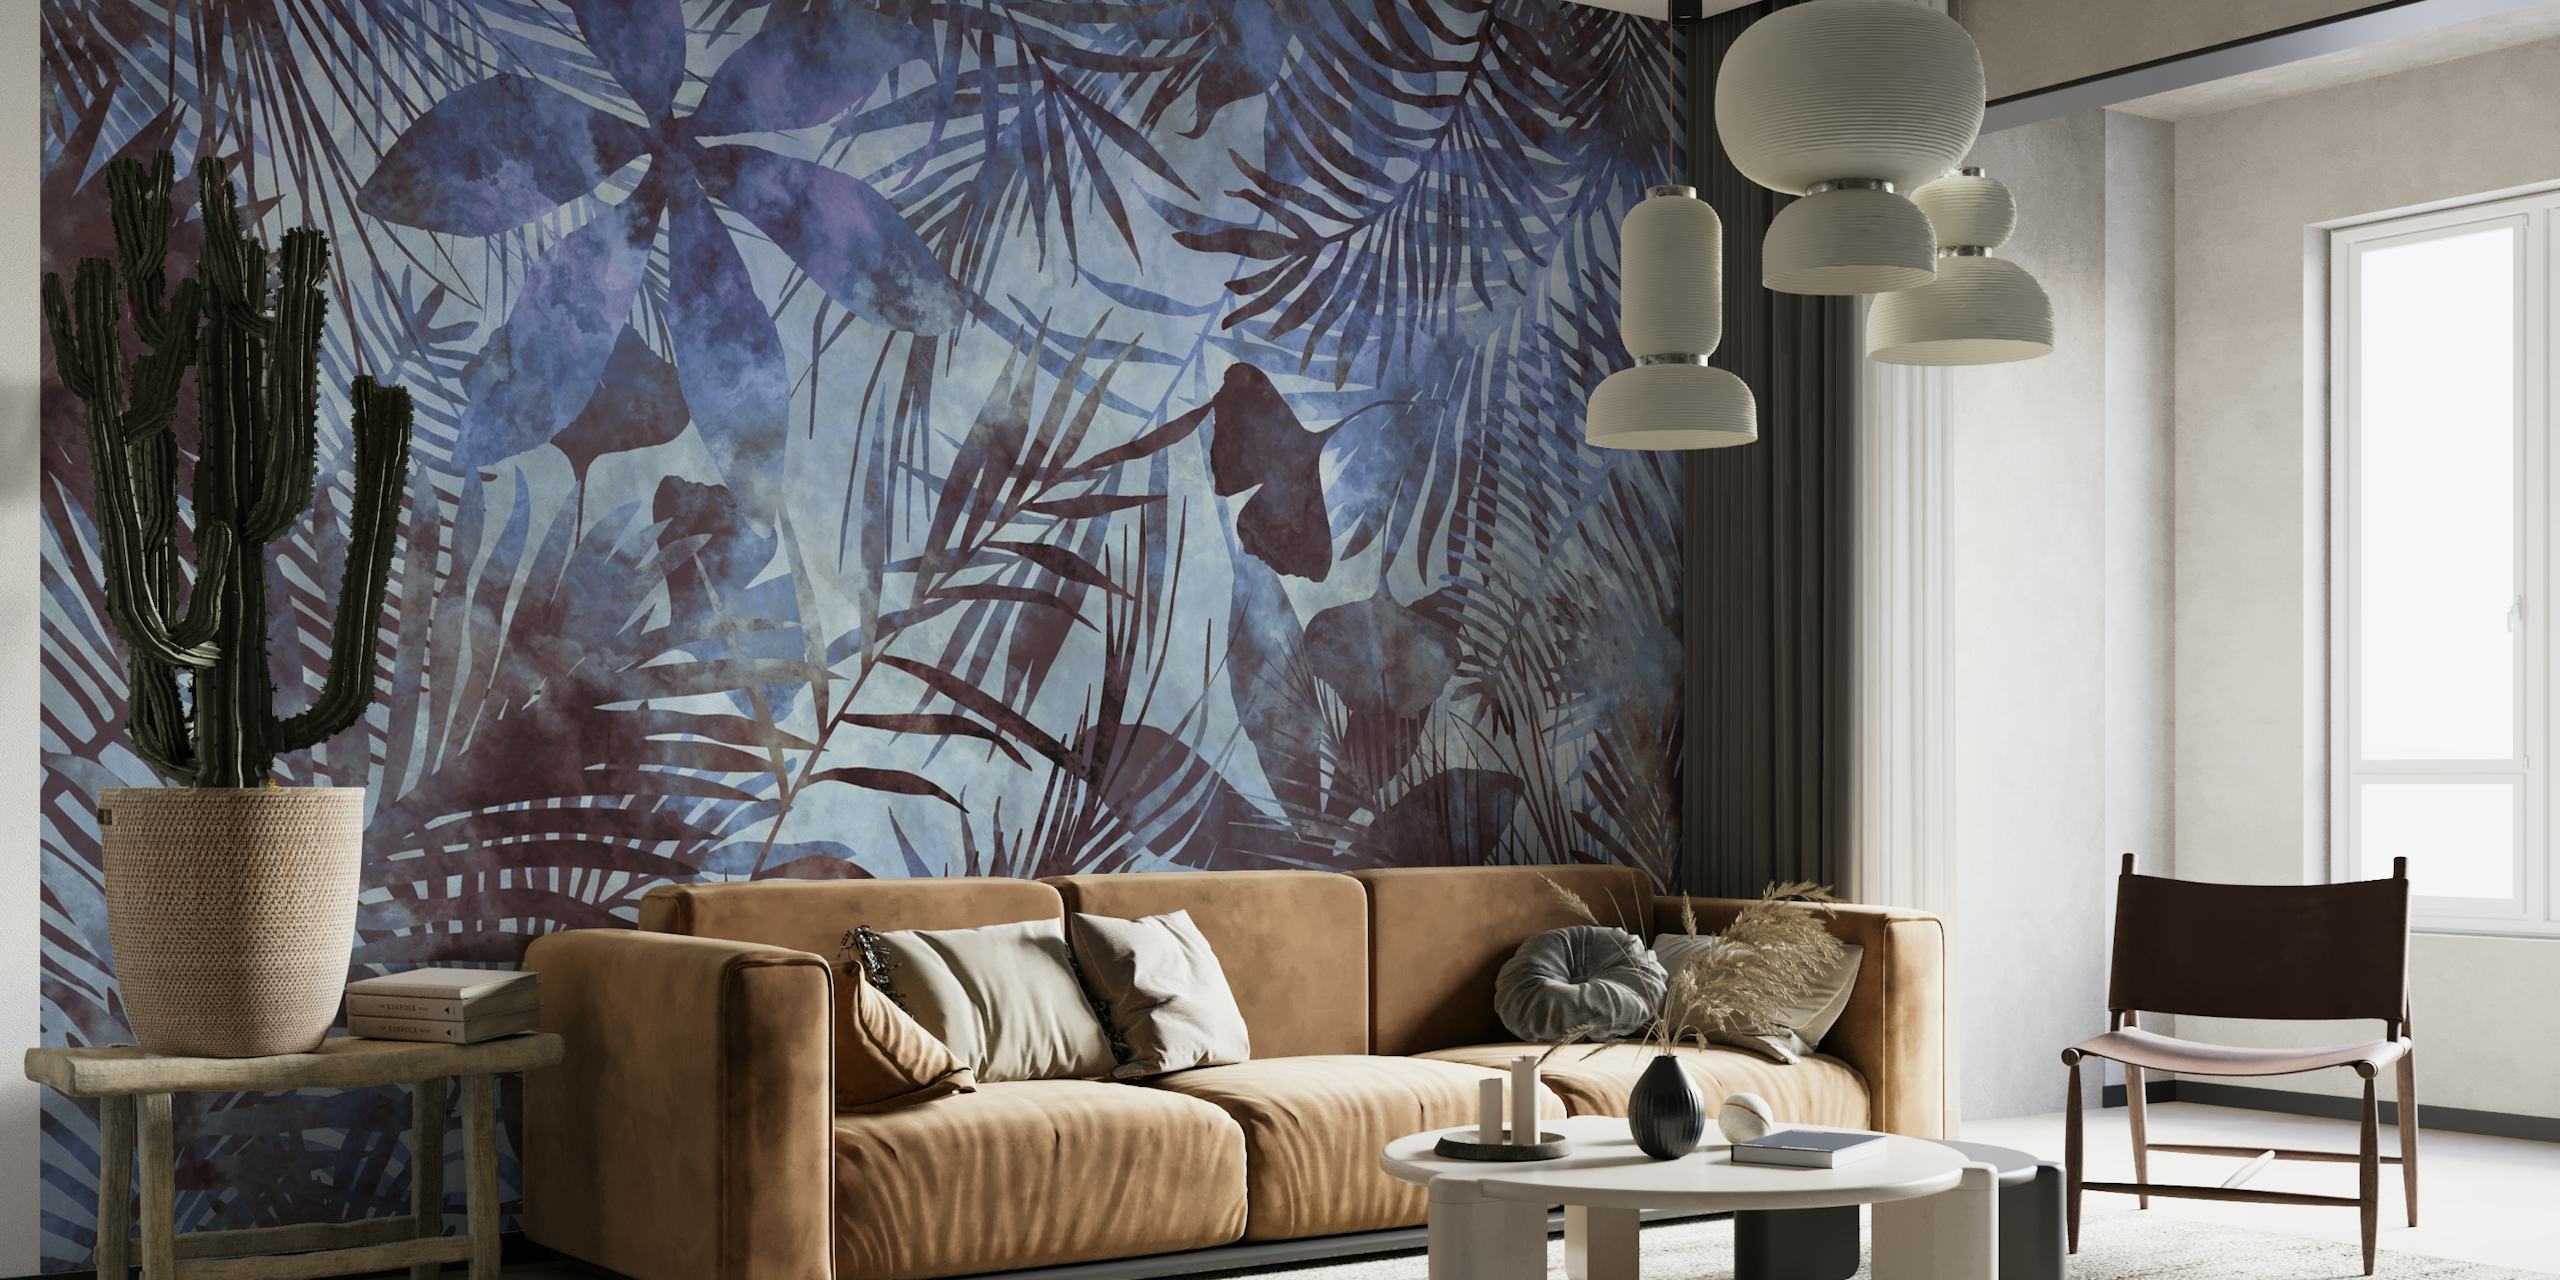 Blue Tropical Jungle Painting wall mural featuring a variety of exotic foliage in shades of blue.